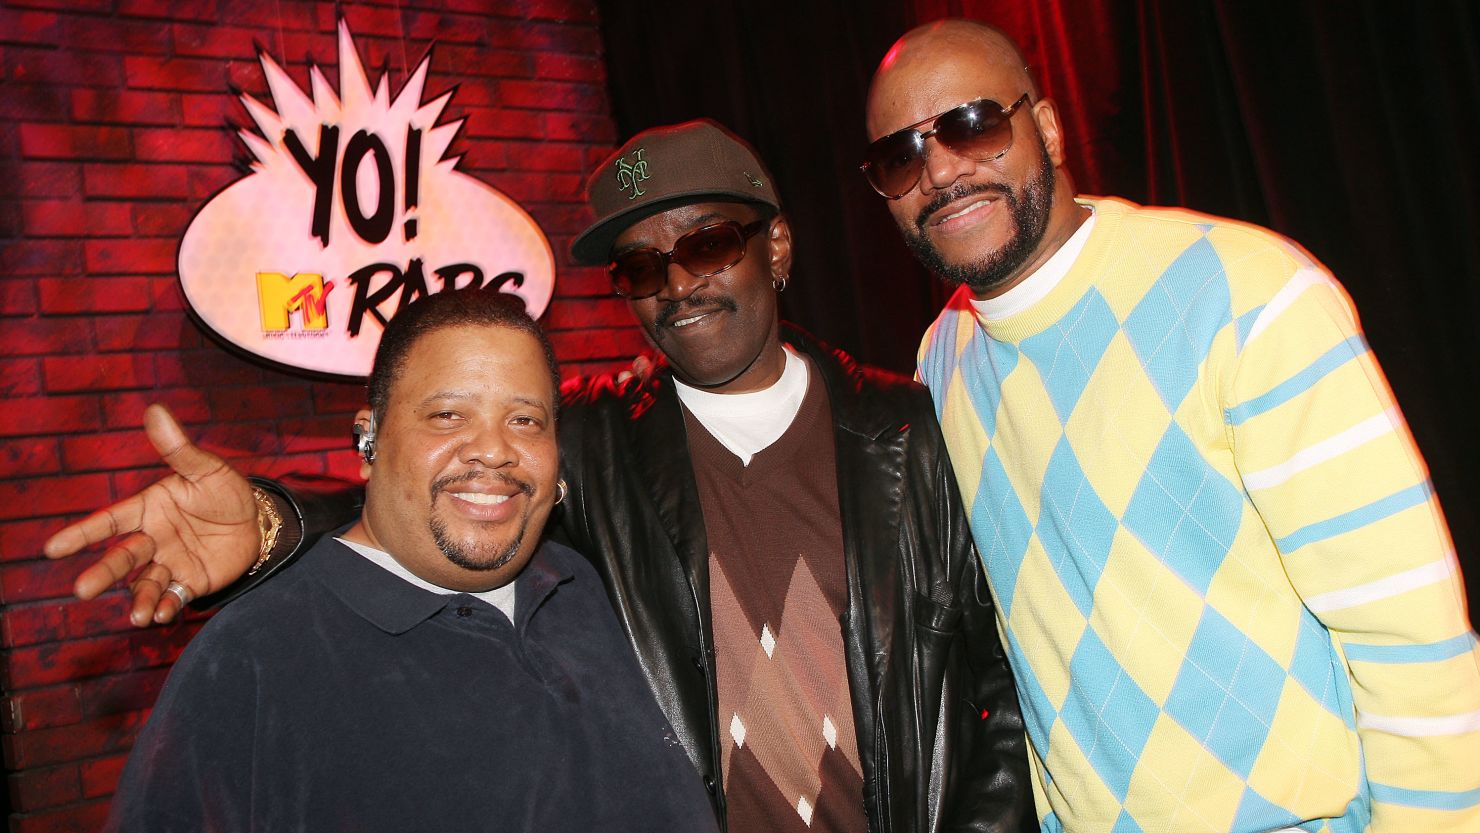 Radio personalities Doctor Dre (L) and Ed Lover (R) and hip hop pioneer Fab 5 Freddy pose for a photo during the Yo! MTV Raps 20th Anniversary Roundtable at the MTV Times Square Studios April 7, 2008 in New York City. 